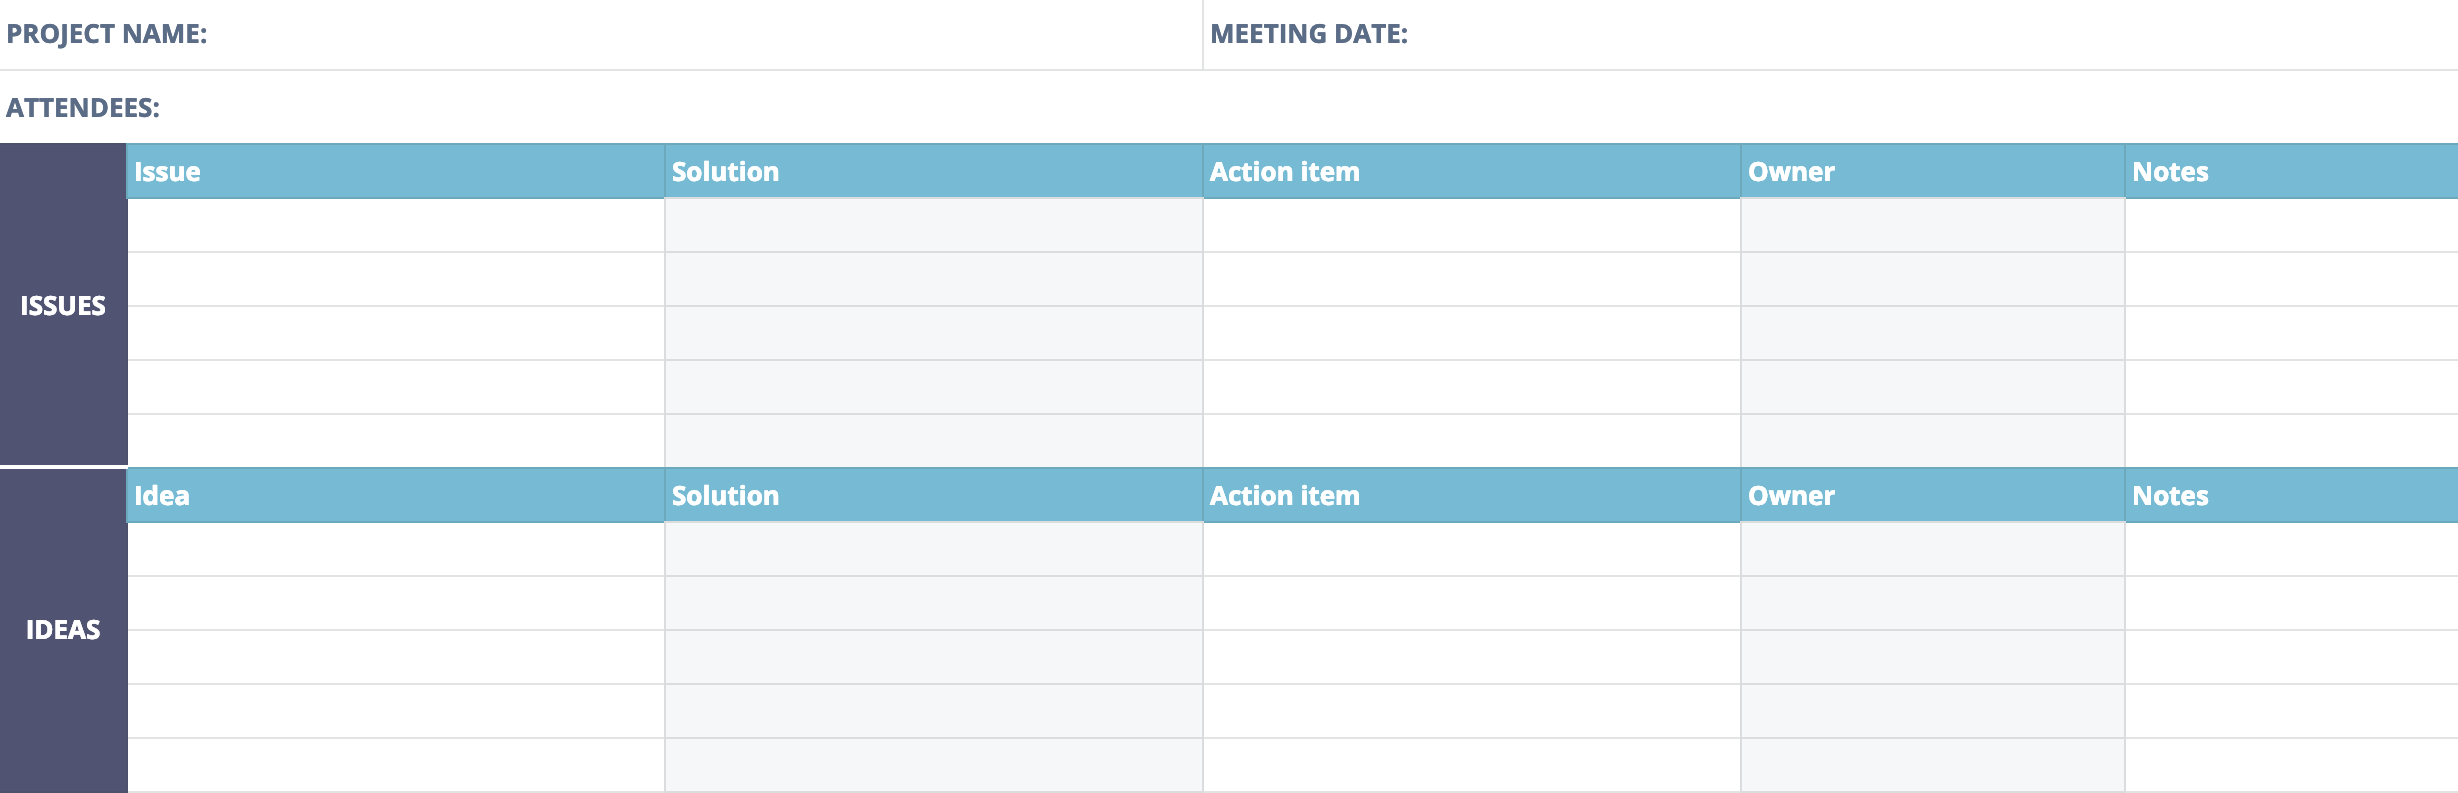 Post Mortem Meeting Template And Tips | Teamgantt Within Post Project Report Template